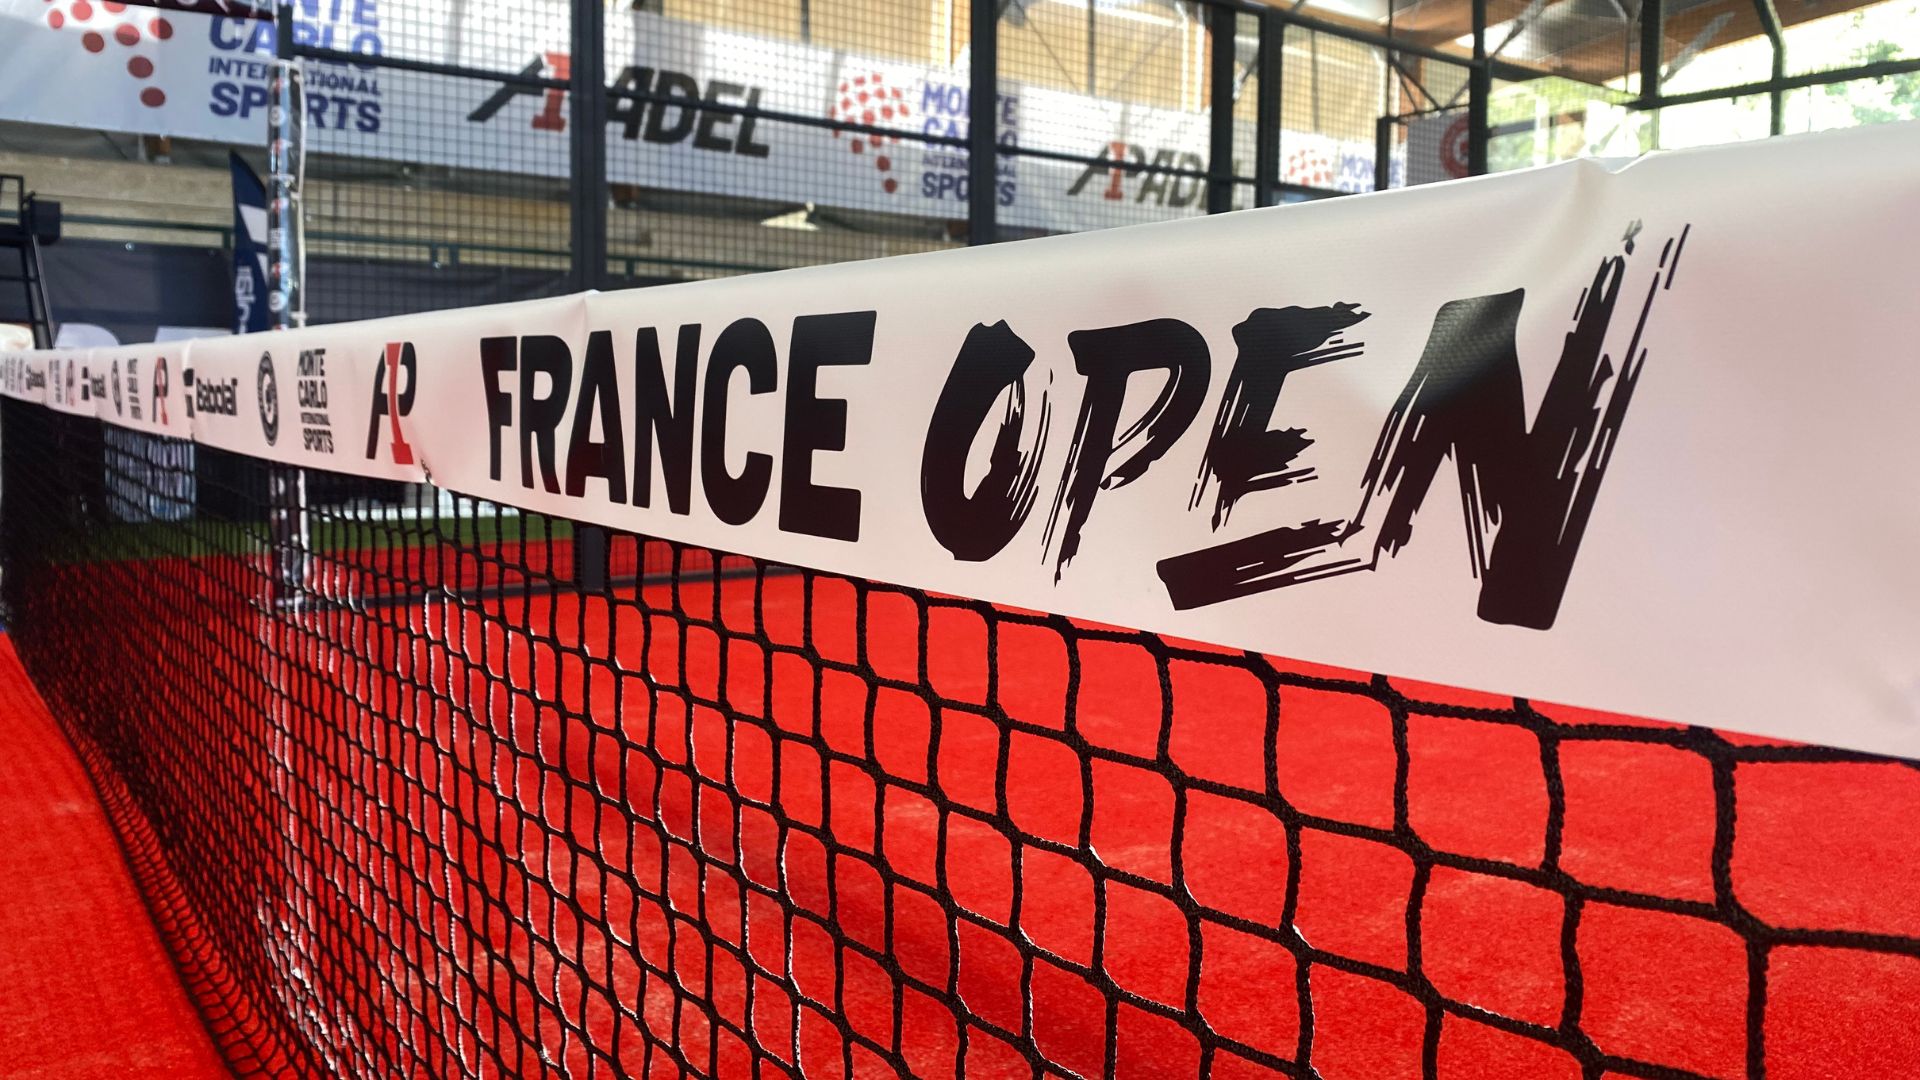 A1 Padel France Open: zweiter Qualifikationstag